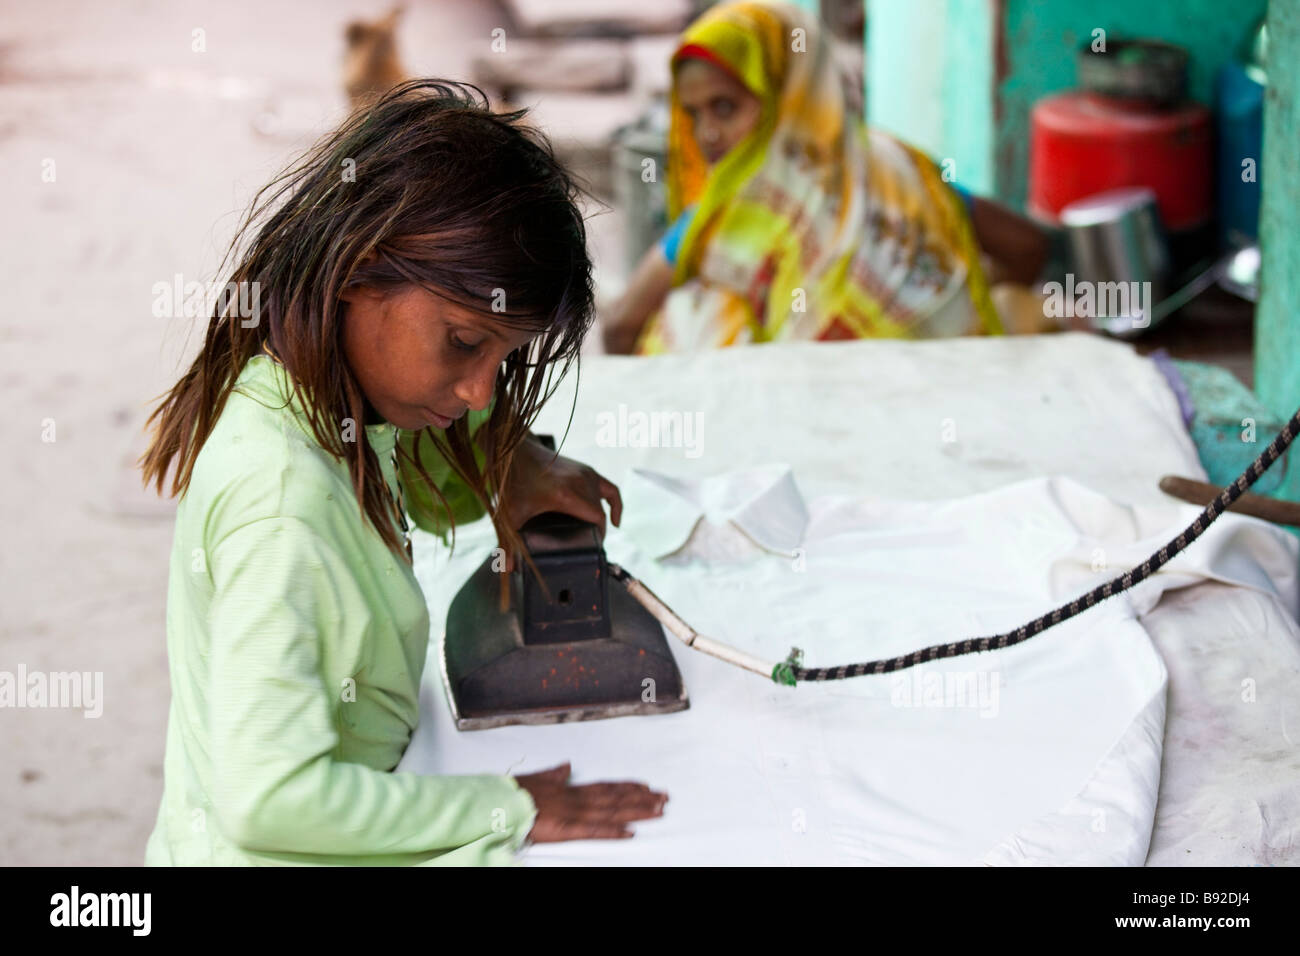 Young Indian Girl Working at a Laundry Ironing Clothing in Fatehpur Sikri India Stock Photo